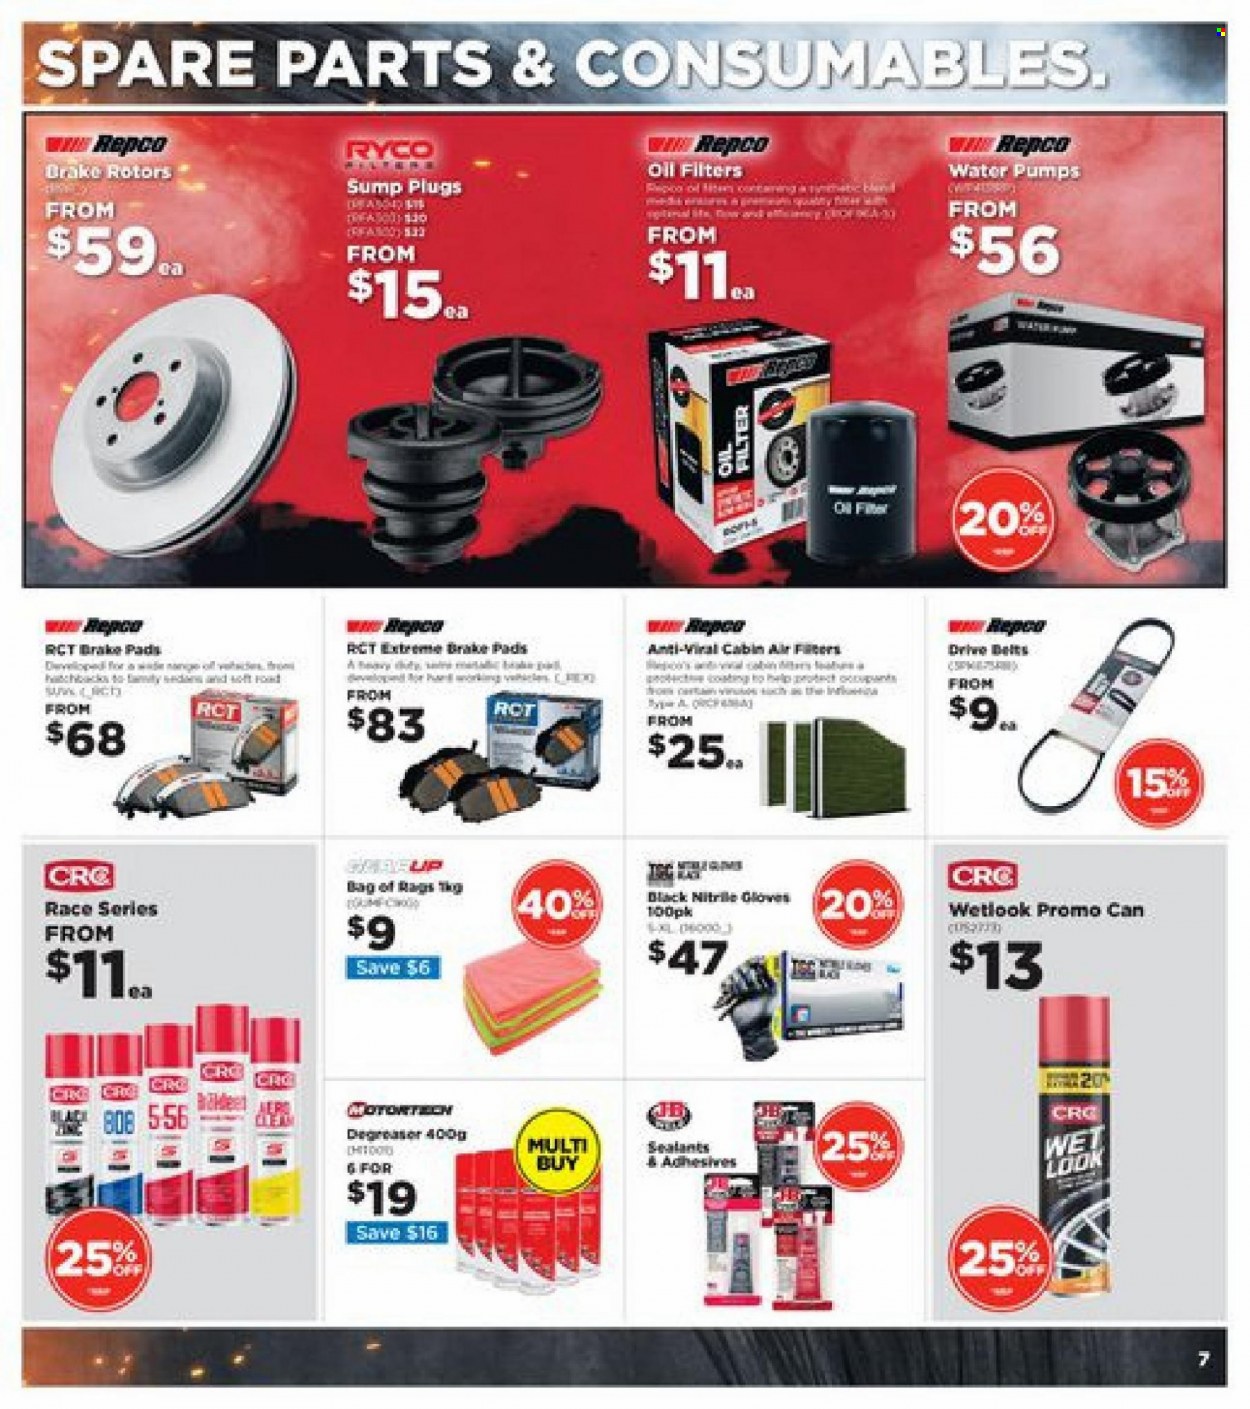 Repco mailer  - 17.11.2021 - 30.11.2021. Page 7.